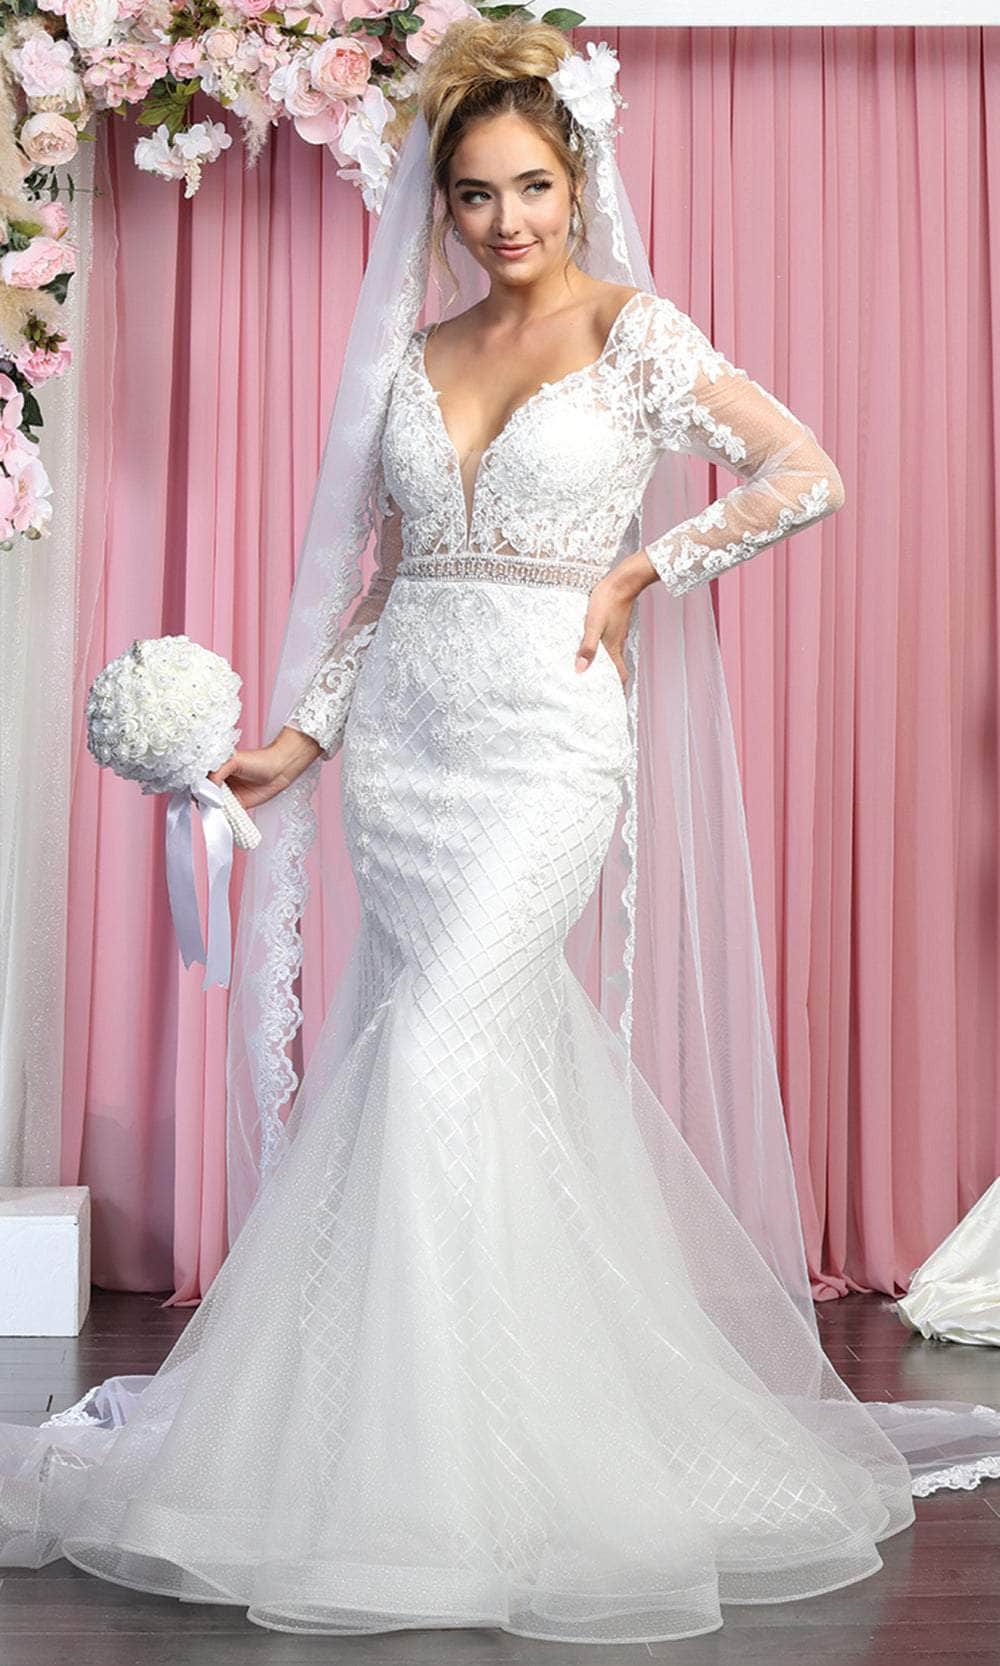 May Queen RQ7896 - Long Sleeves Sheer V-neck Wedding Gown Wedding Dresses